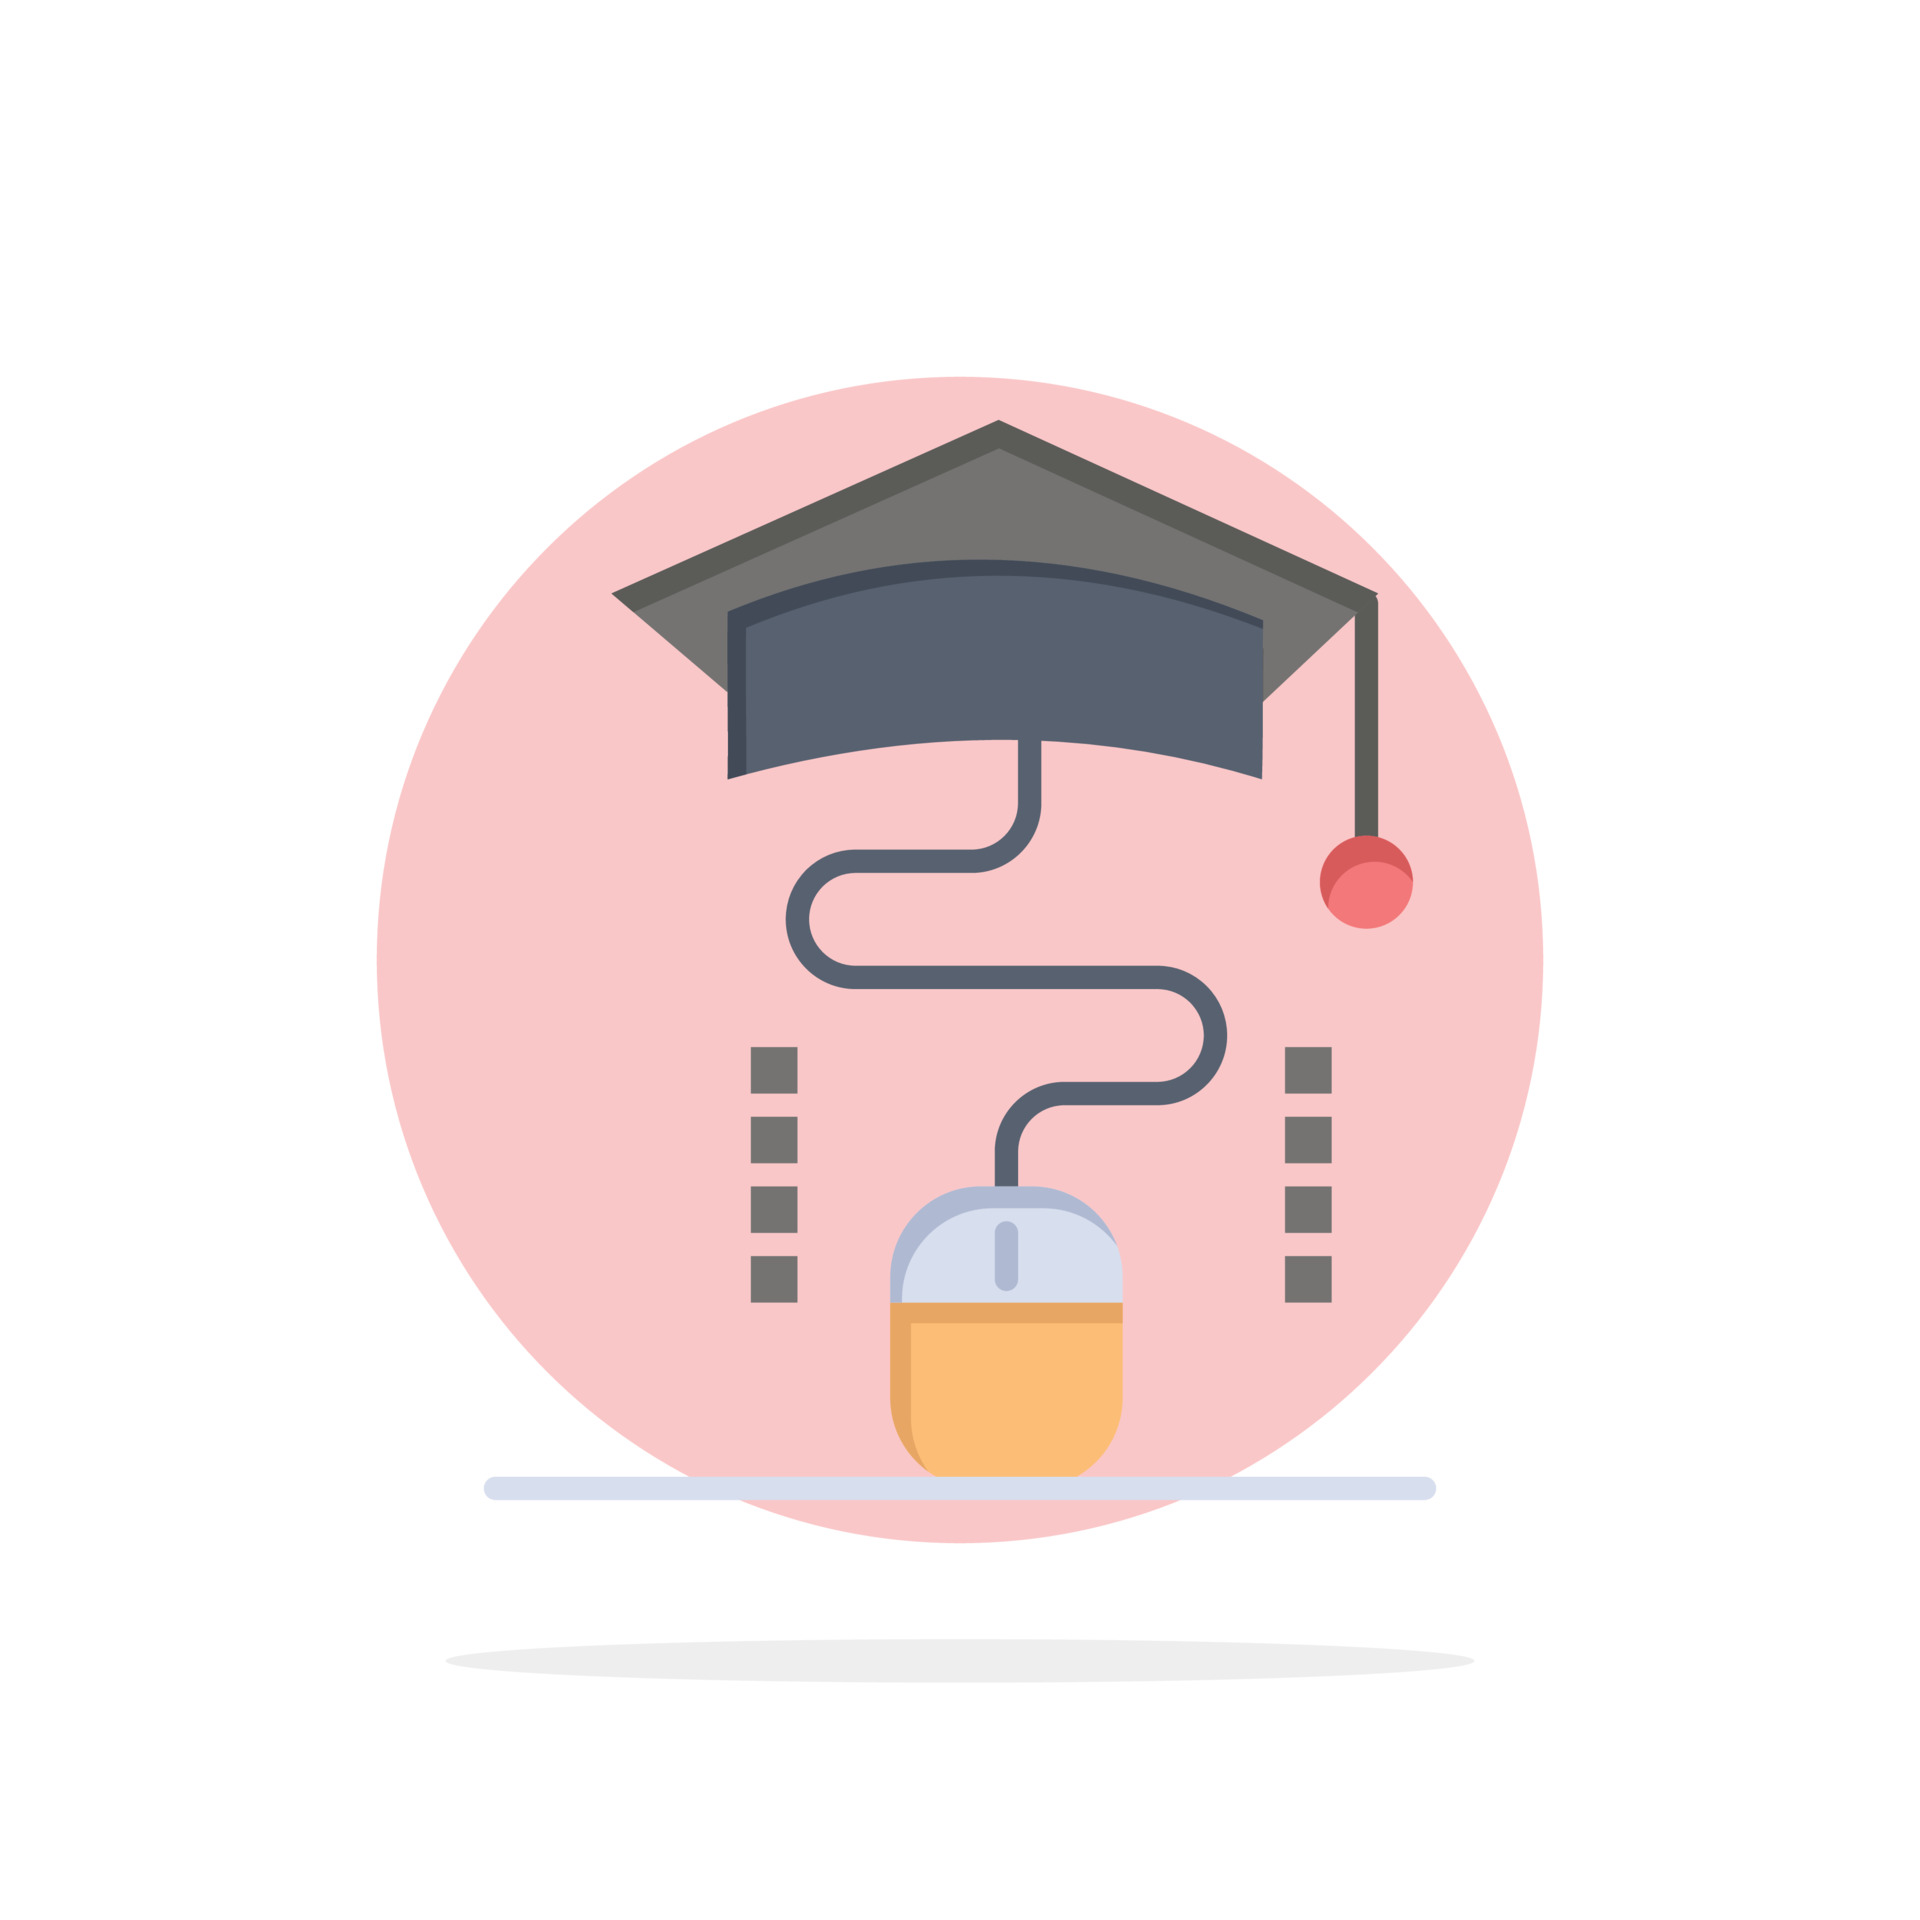 vecteezy_mouse-graduation-online-education-abstract-circle-background_13193603.jpg